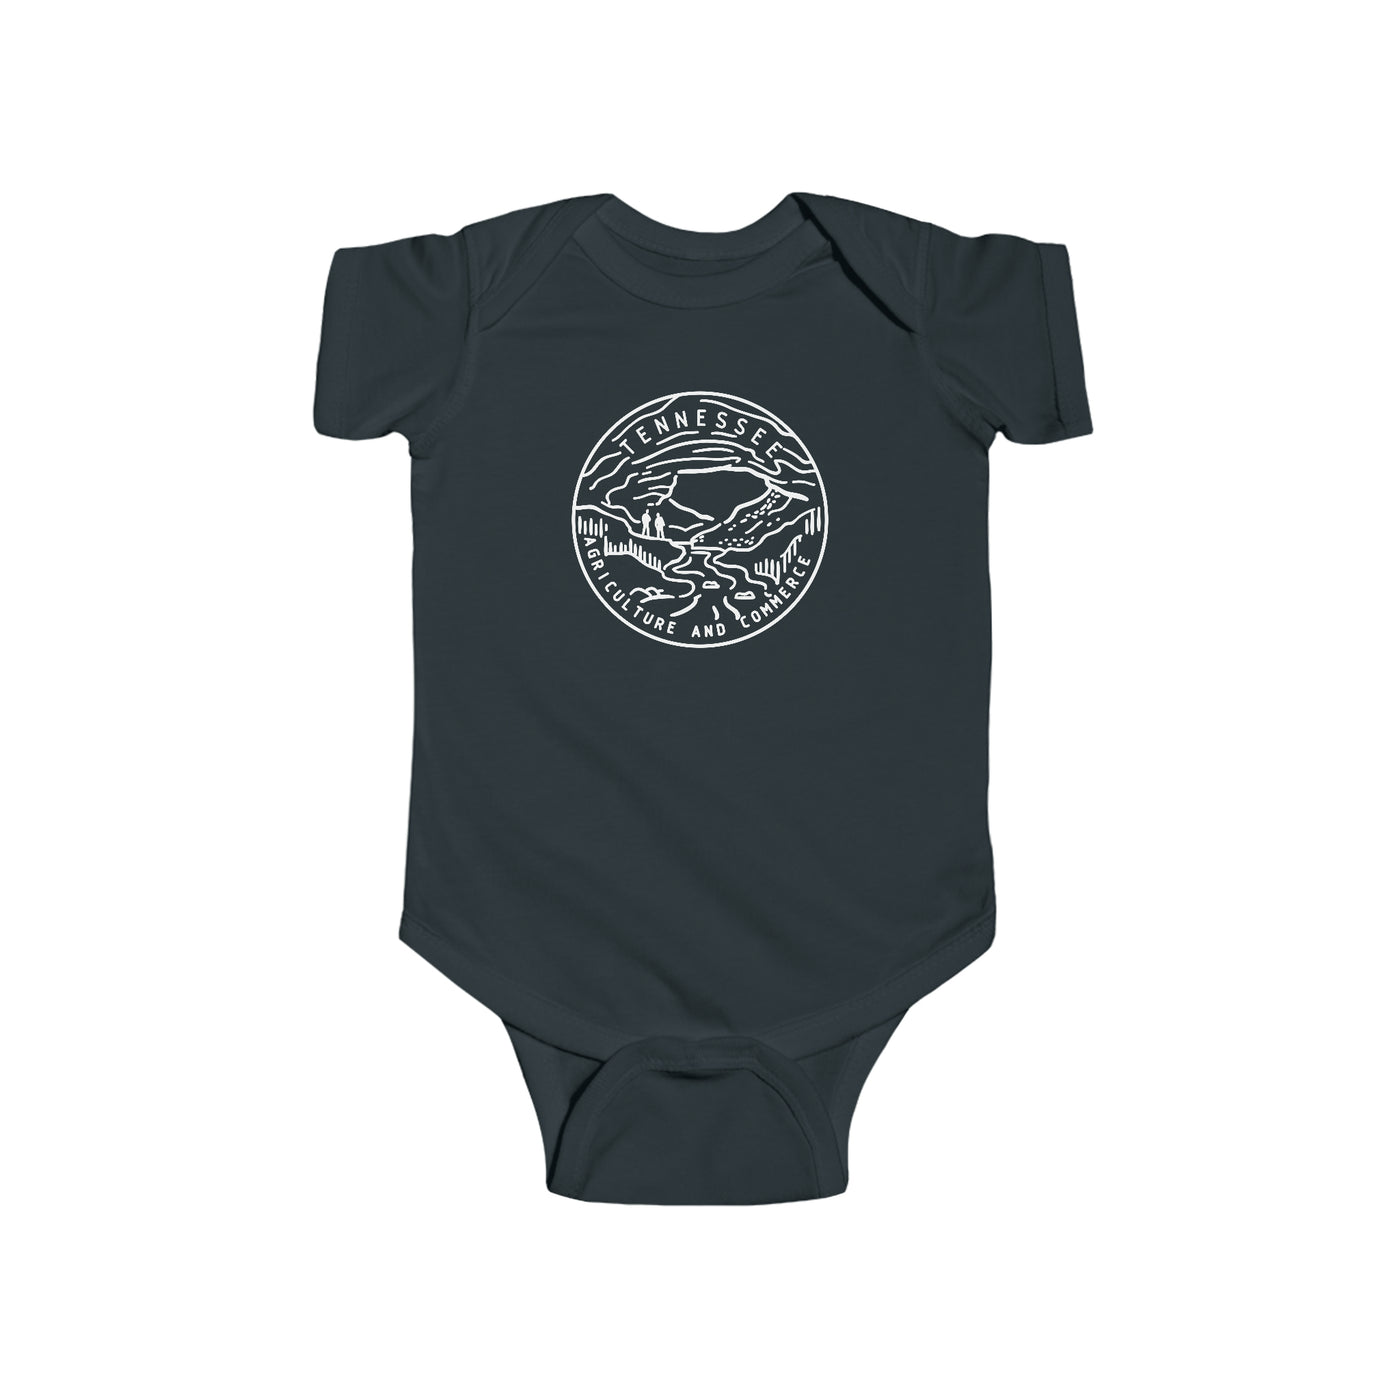 Tennessee State Motto Baby Bodysuit